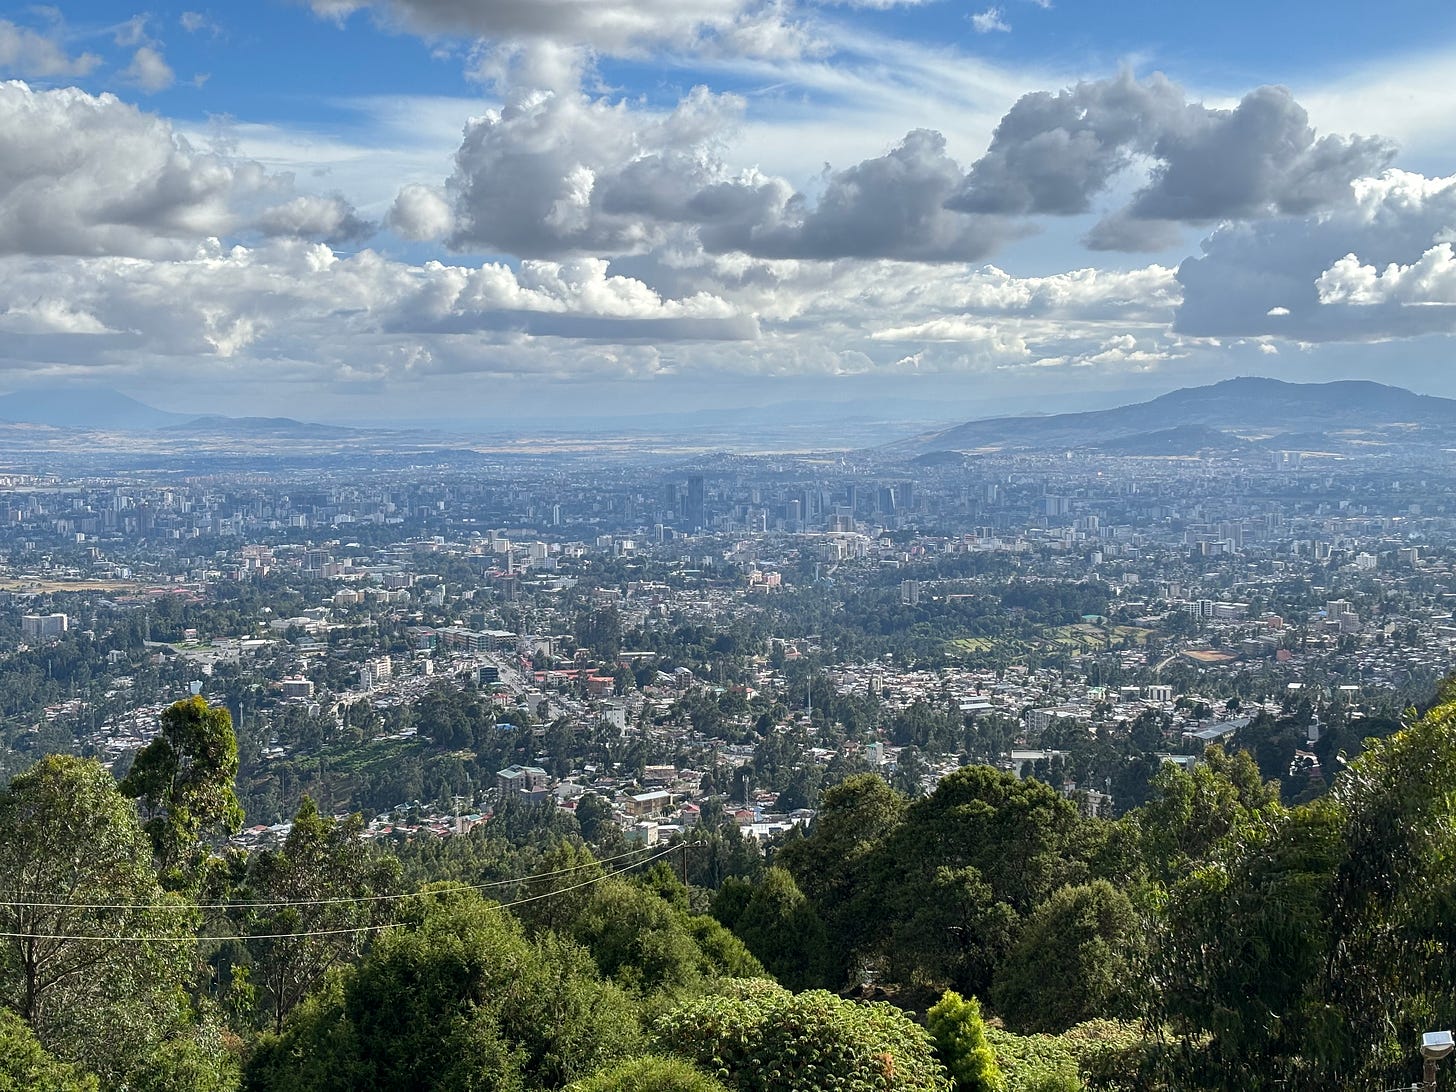 Addis Ababa, viewed from the Entoto hills